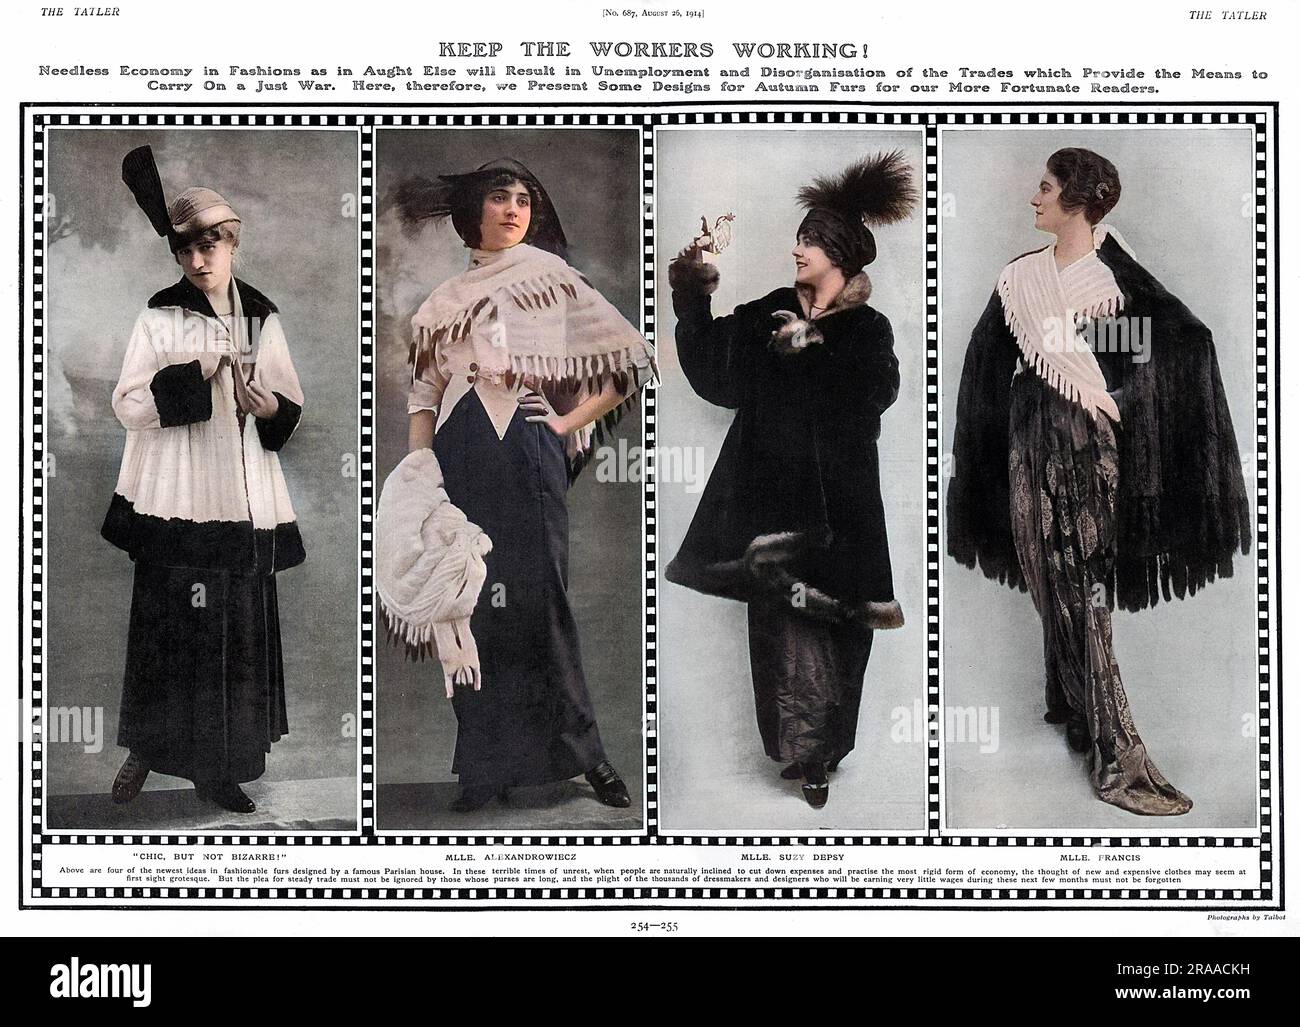 A spread from The Tatler featuring four designs for fur coats from a Parisian design house and ladies to continue to buy luxury fashion in wartime.  It states that even though the 'thought of new and expensive clothes may seem at first sight grotesque...But the plea for steady trade must not be ignored by those whose purses are long, and plight of the thousands of dressmakers and designers who will be earning very little wages during these next few months must not be forgotten.'     Date: 1914 Stock Photo